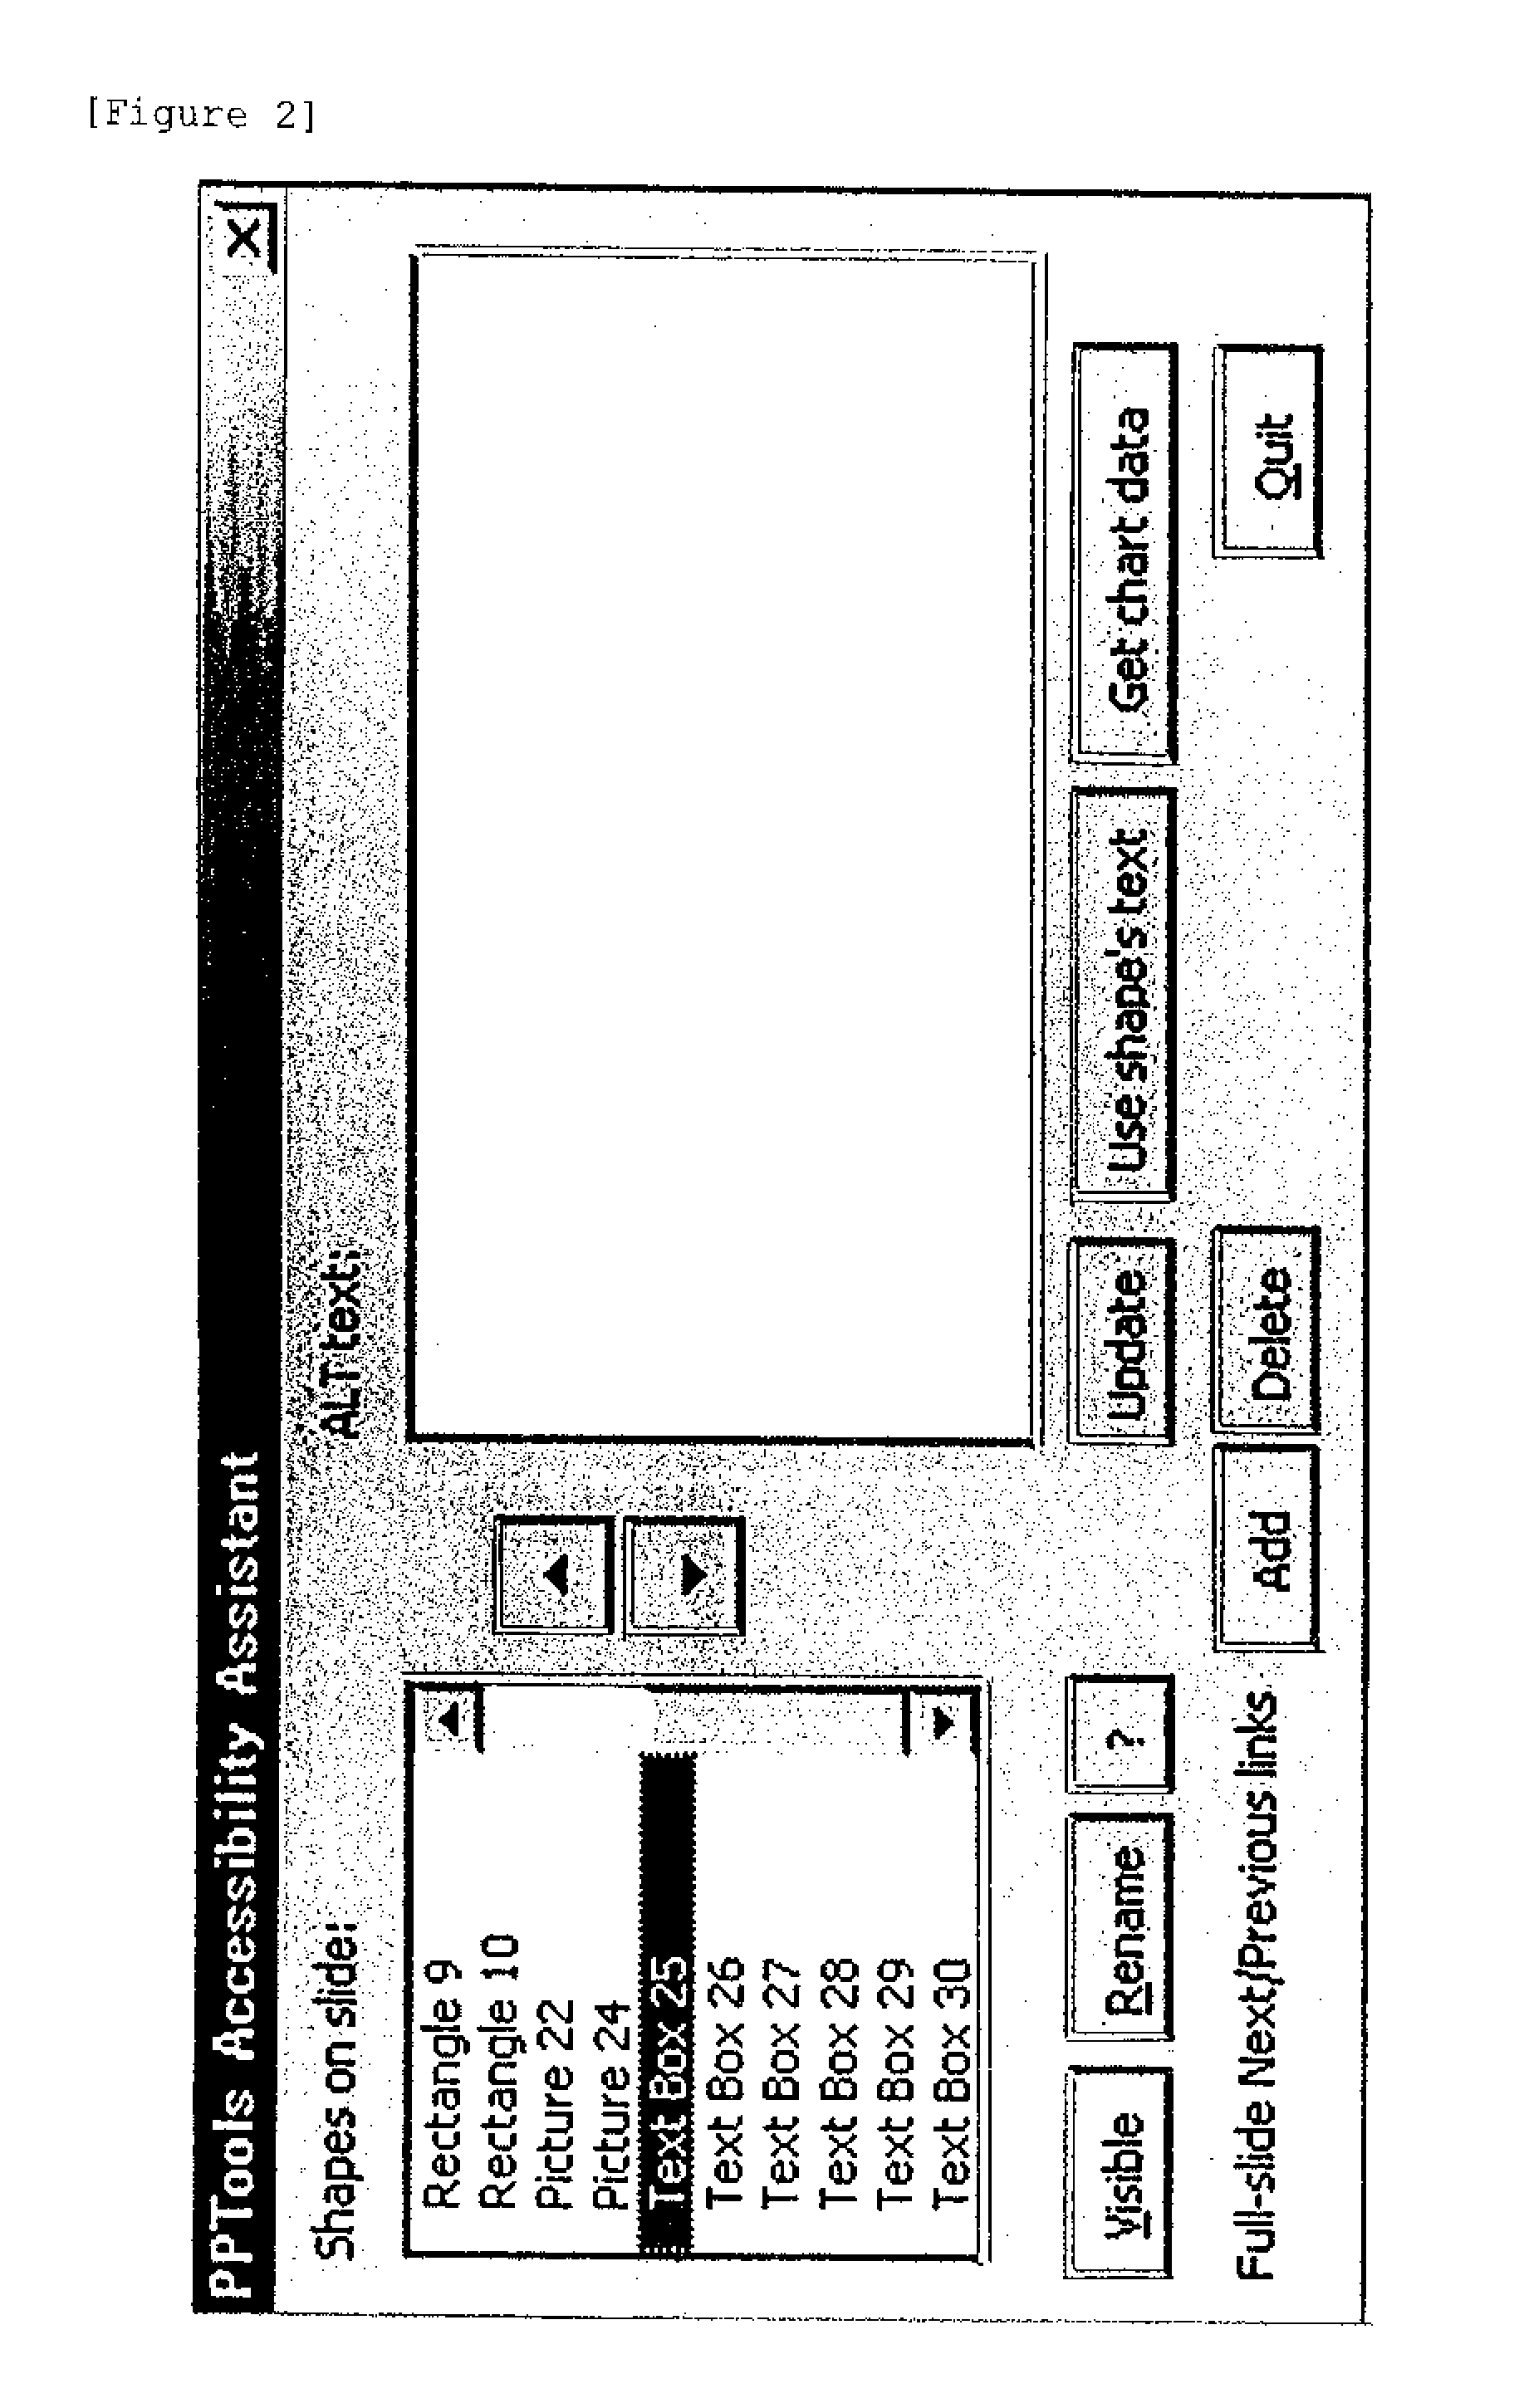 Method, Program, and Device for Analyzing Document Structure